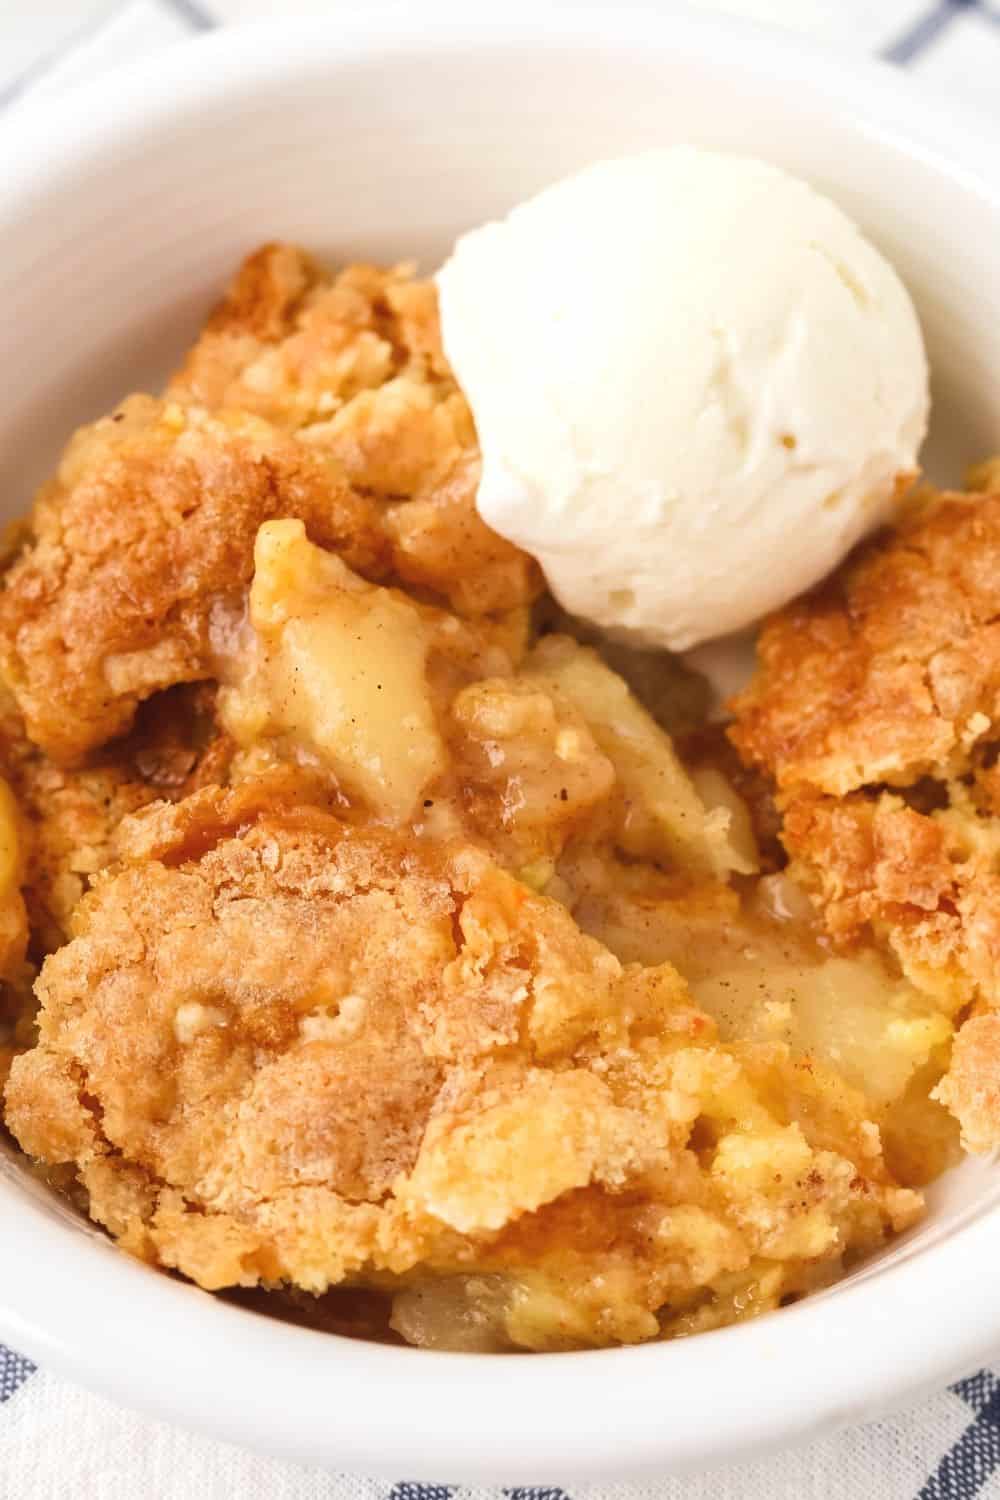 close-up view of the crackled crunchy topping of the canned pear dump cake made with cake mix